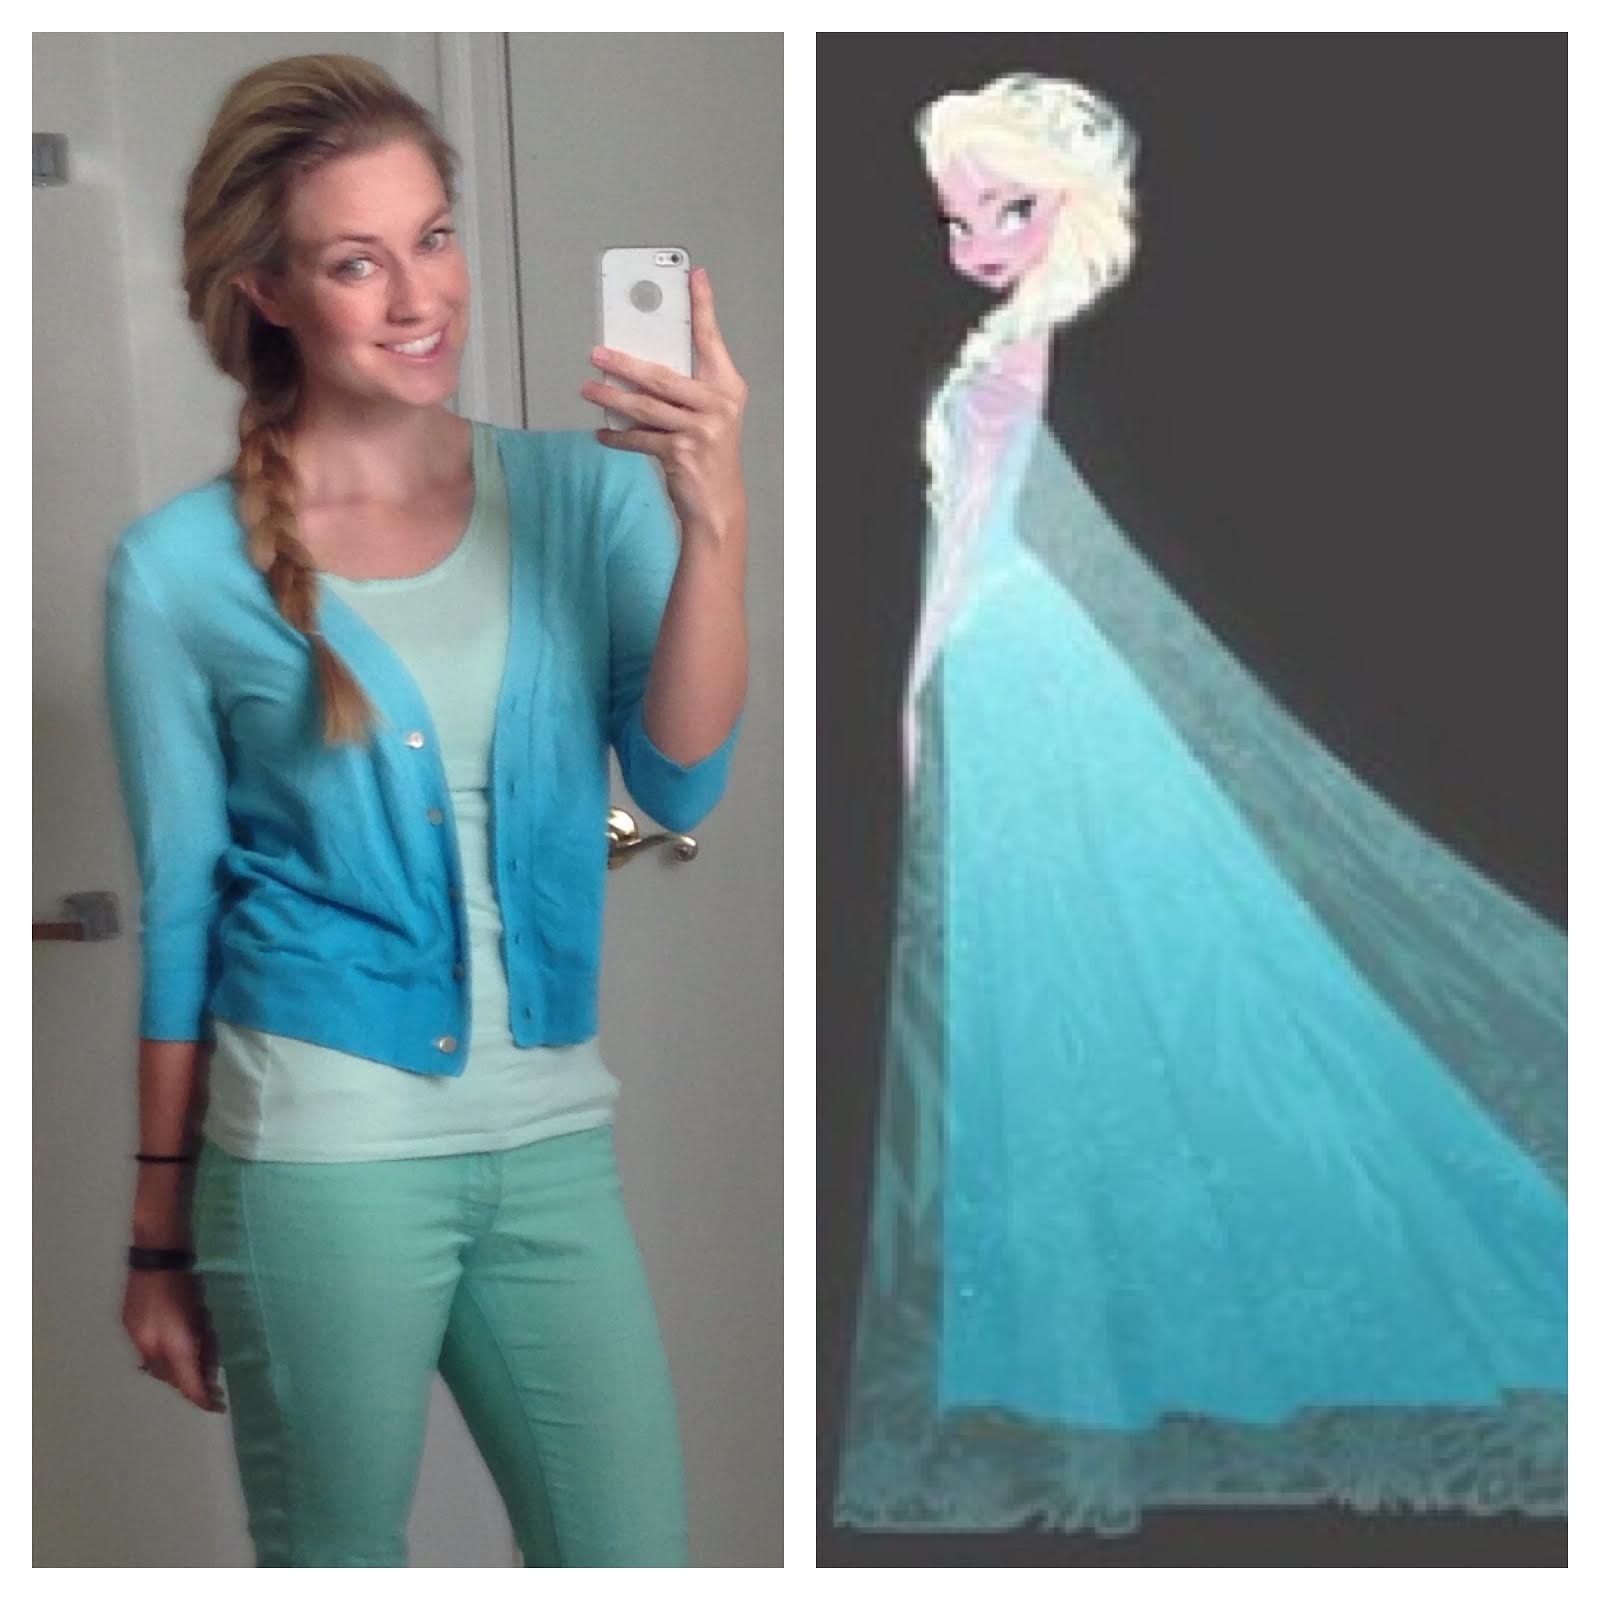 anna frozen inspired outfit